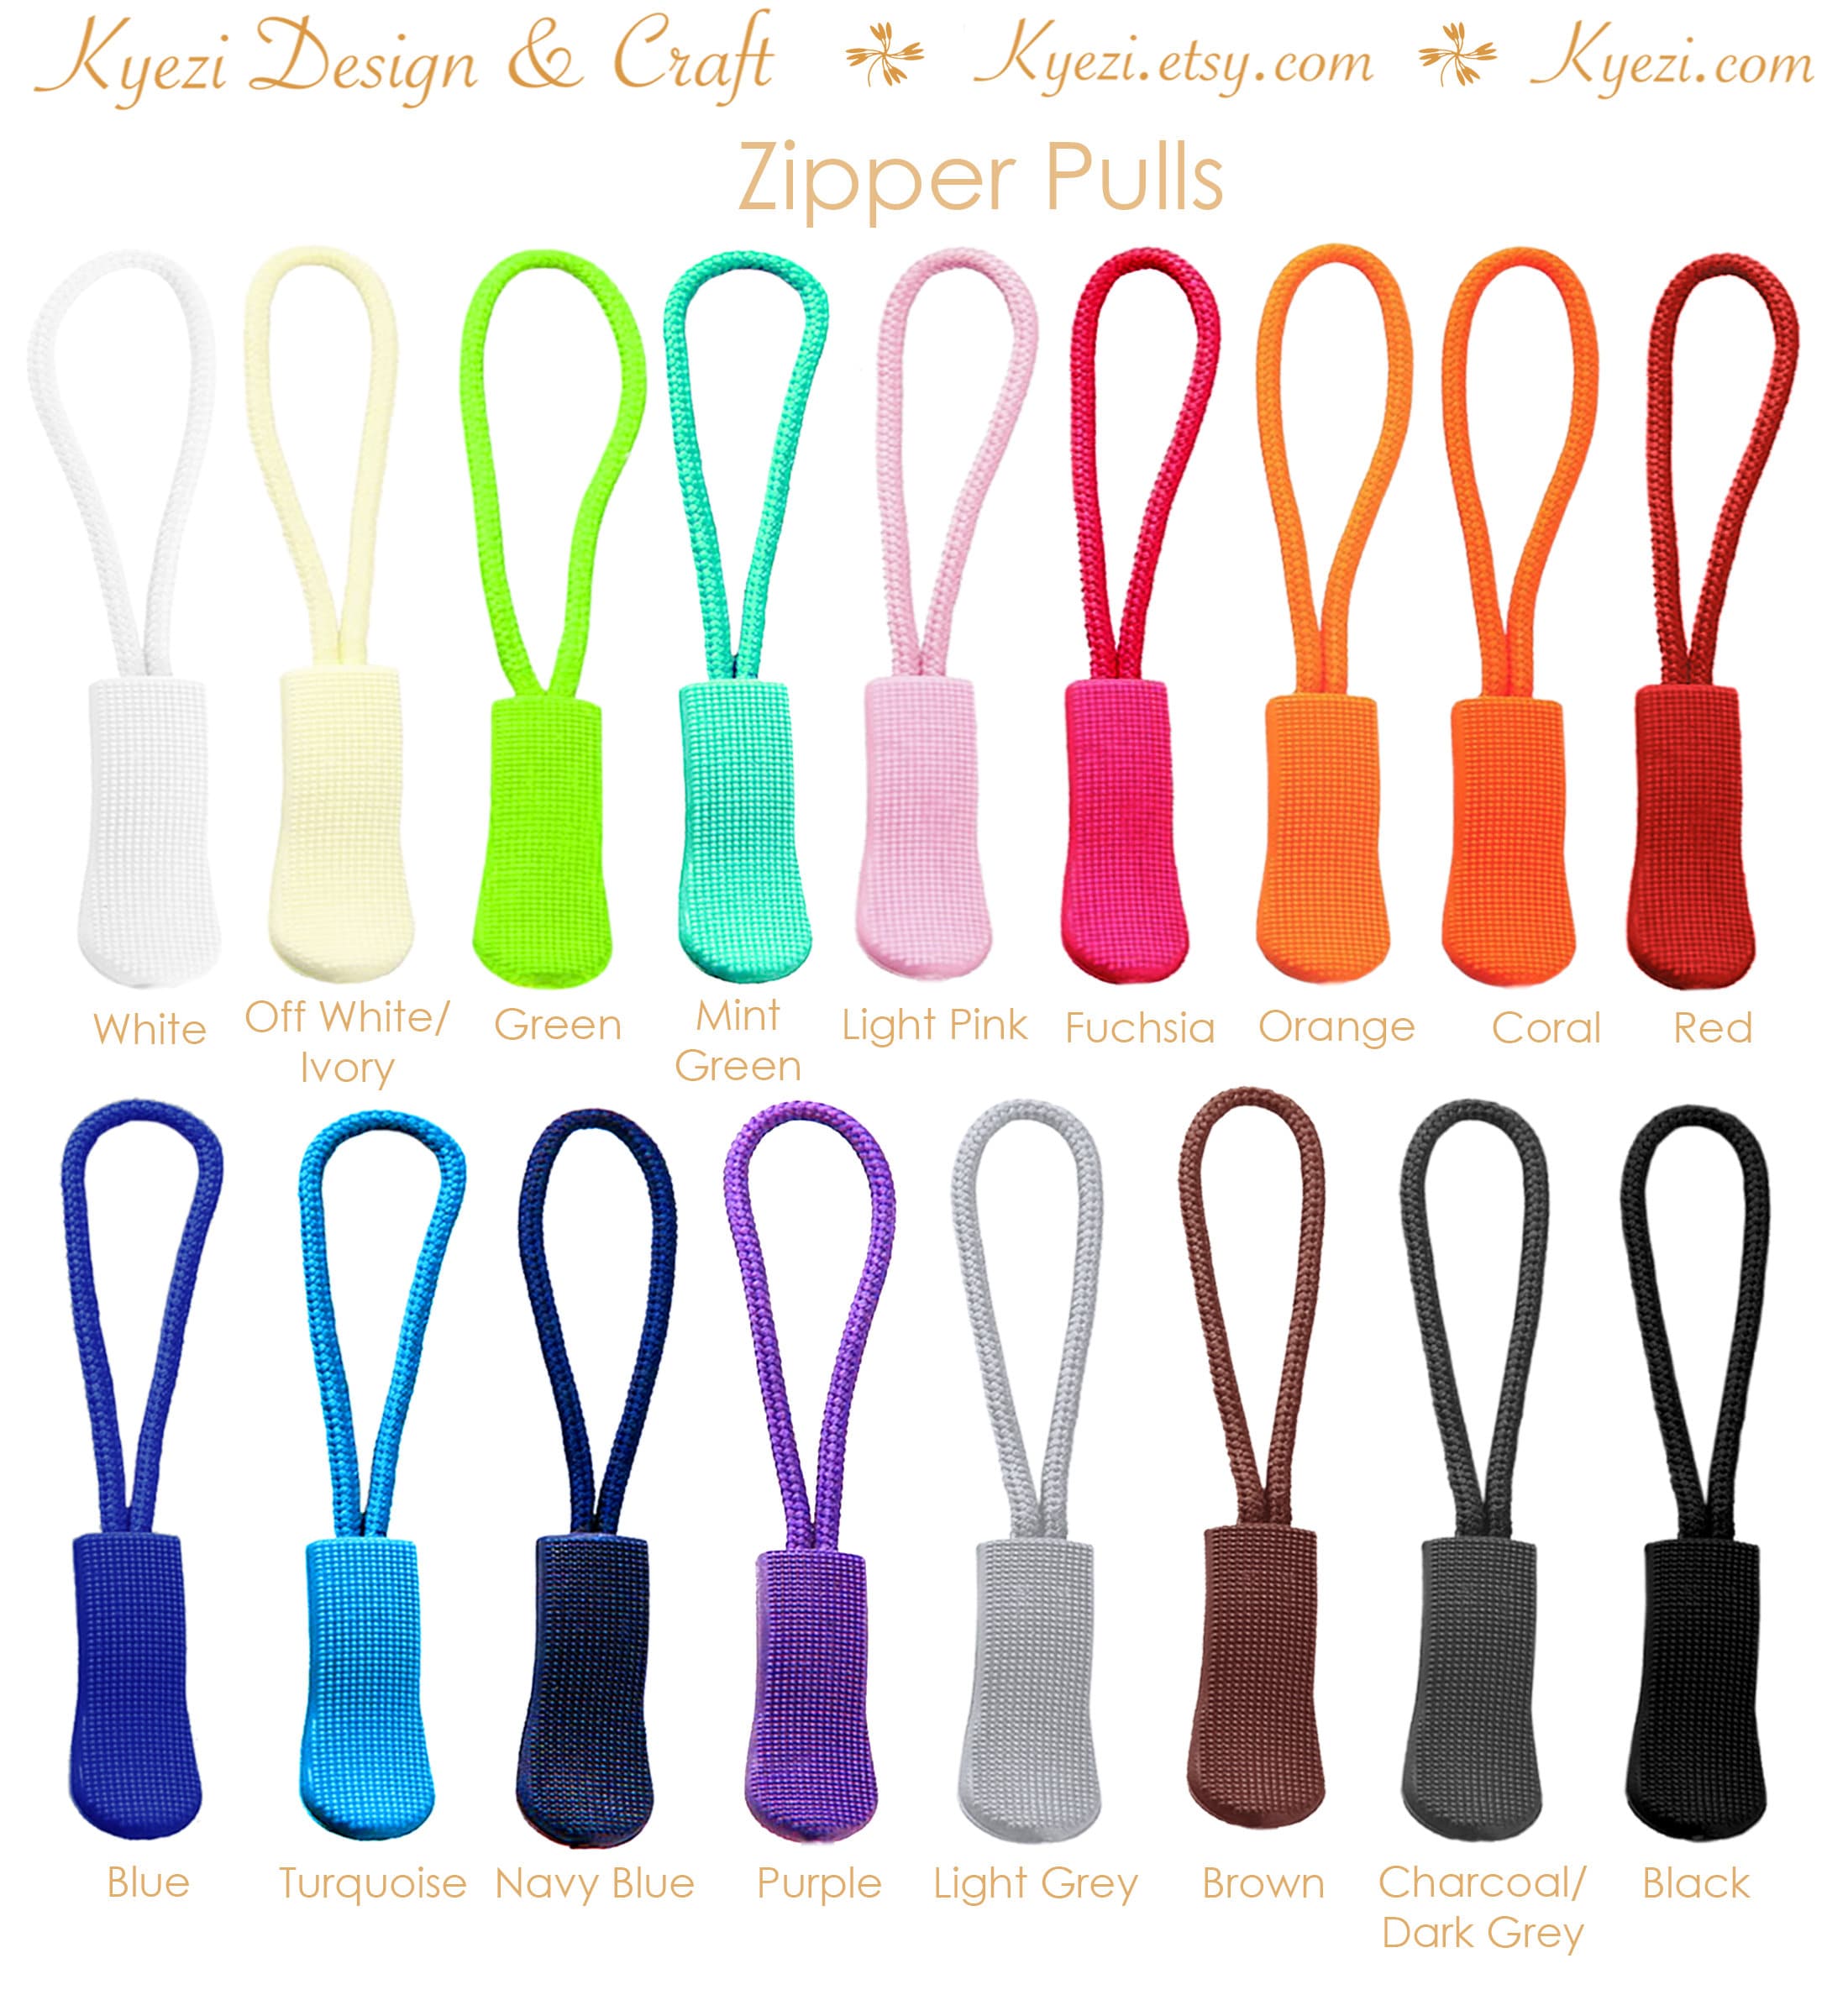 Quality Wholesale wholesale zipper pulls For Crafts And Repairs